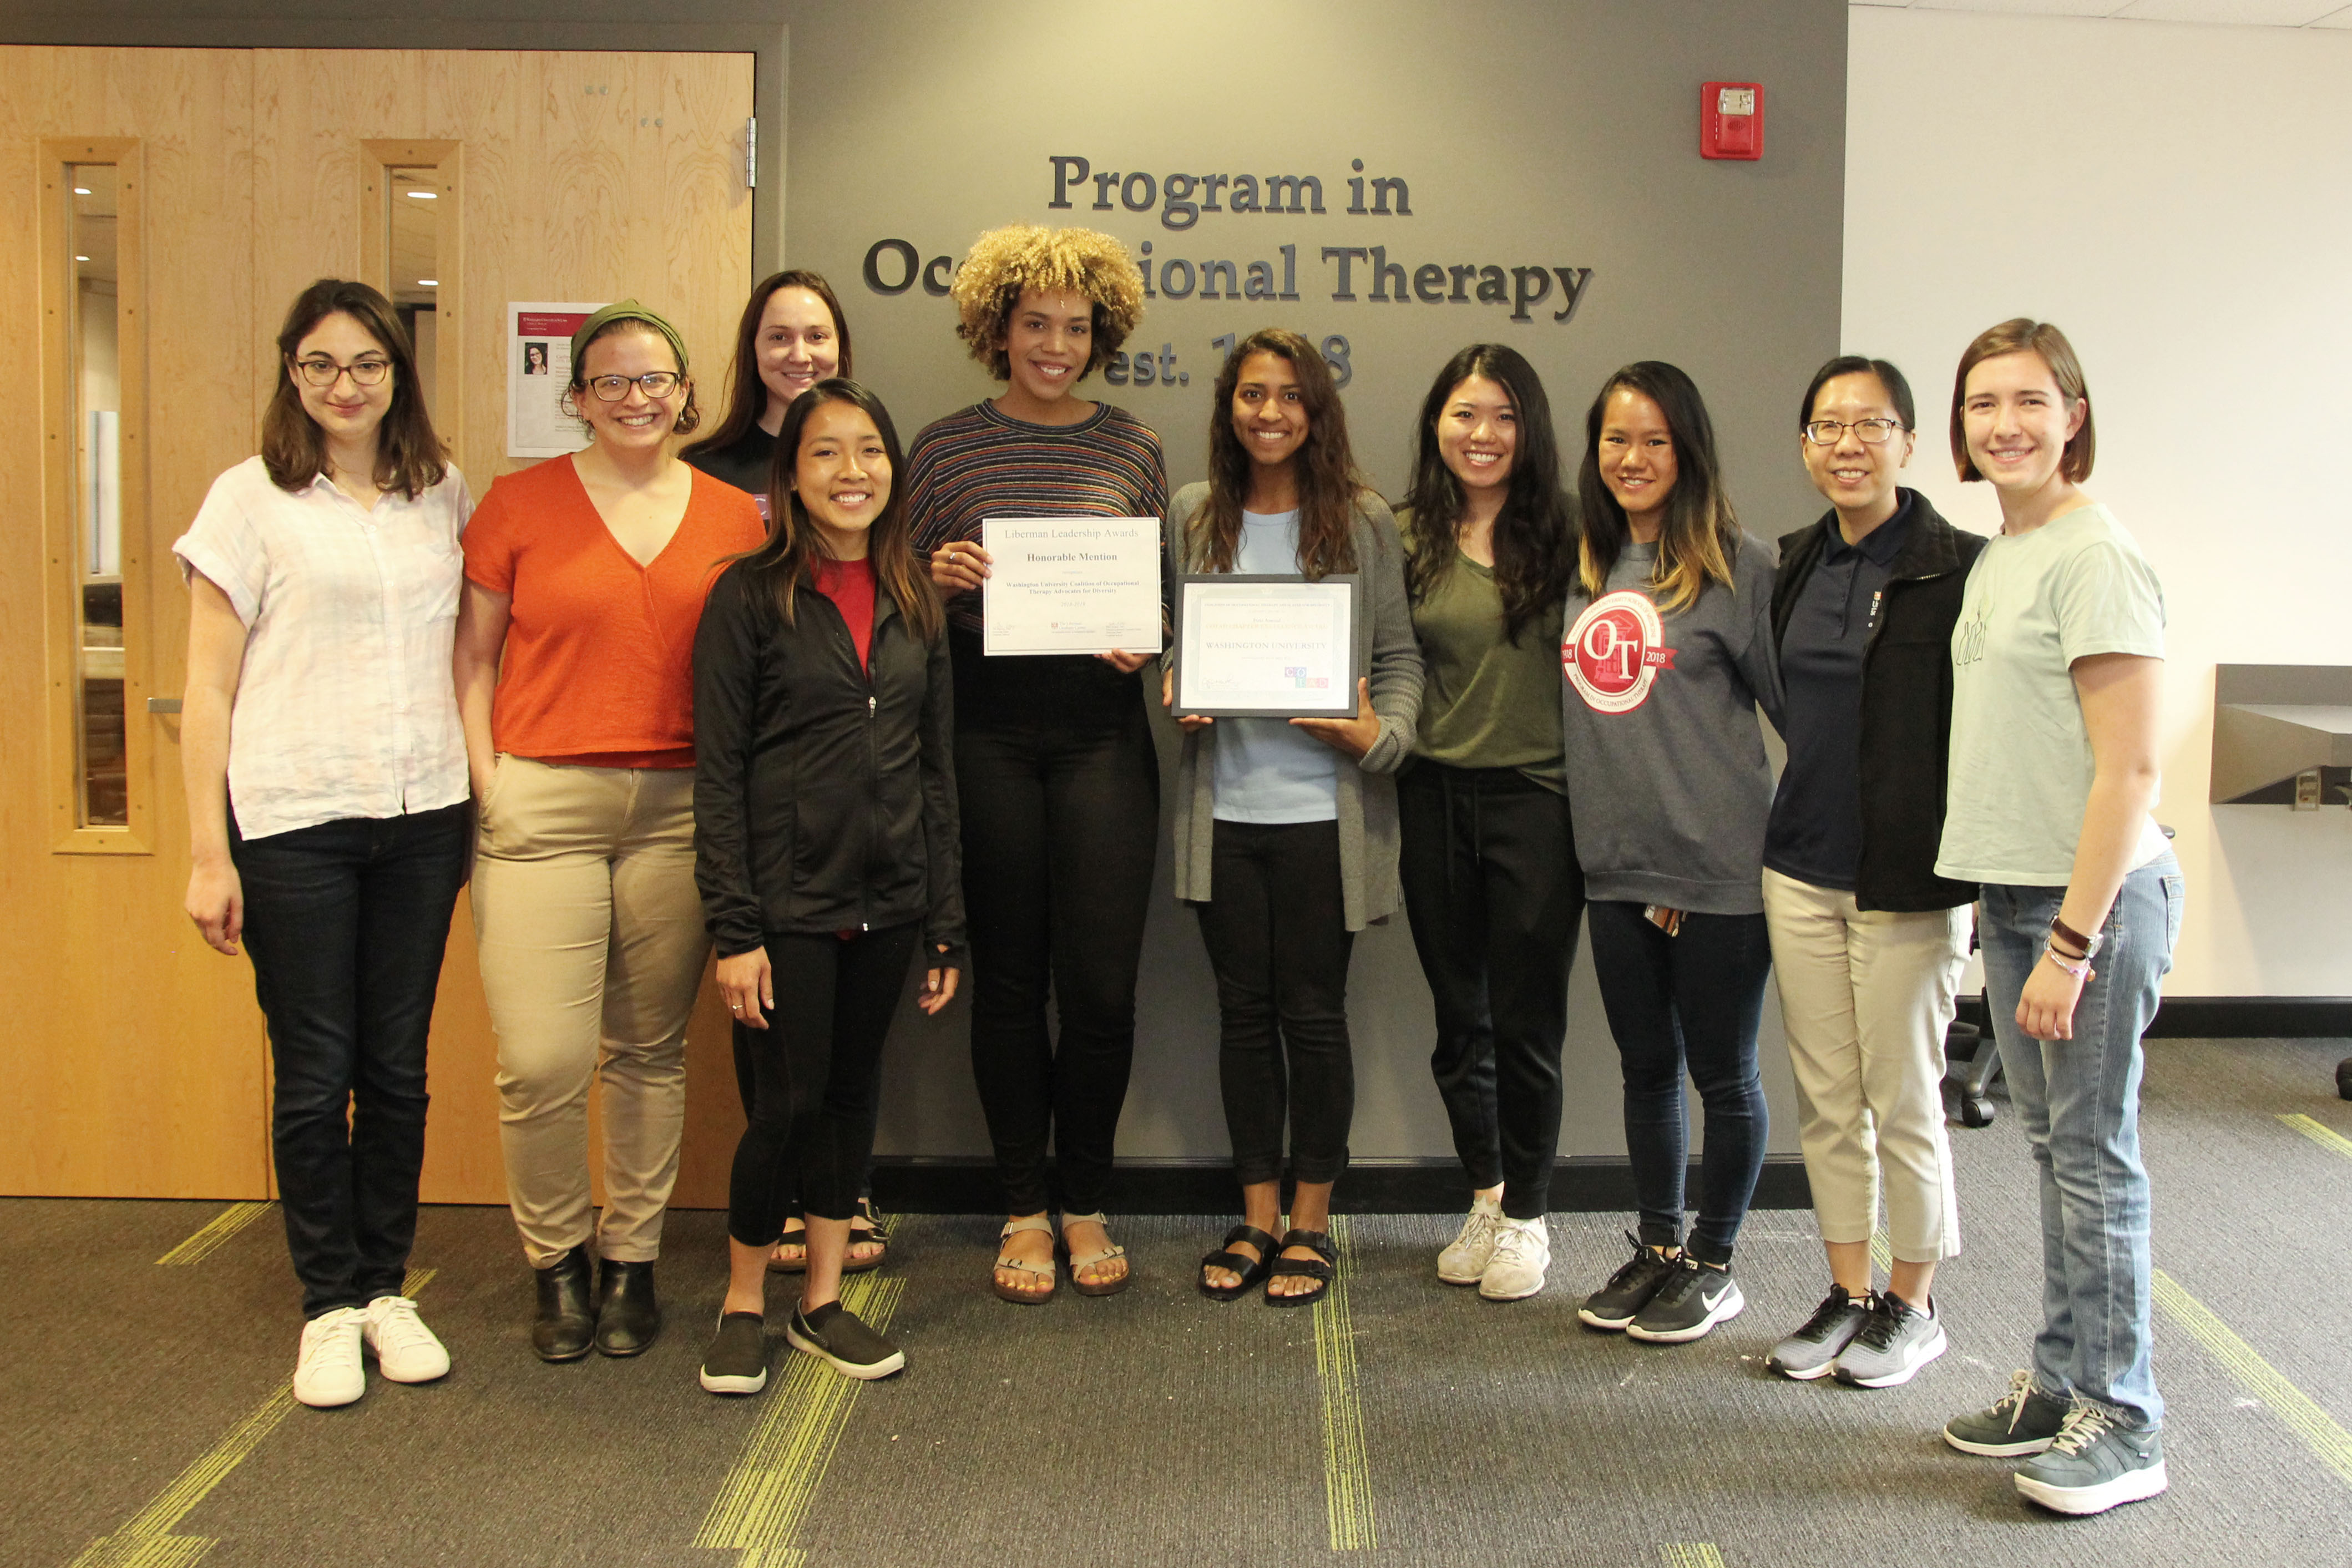 Student members of the Washington University Coalition of Occupational Therapy Advocates Chapter